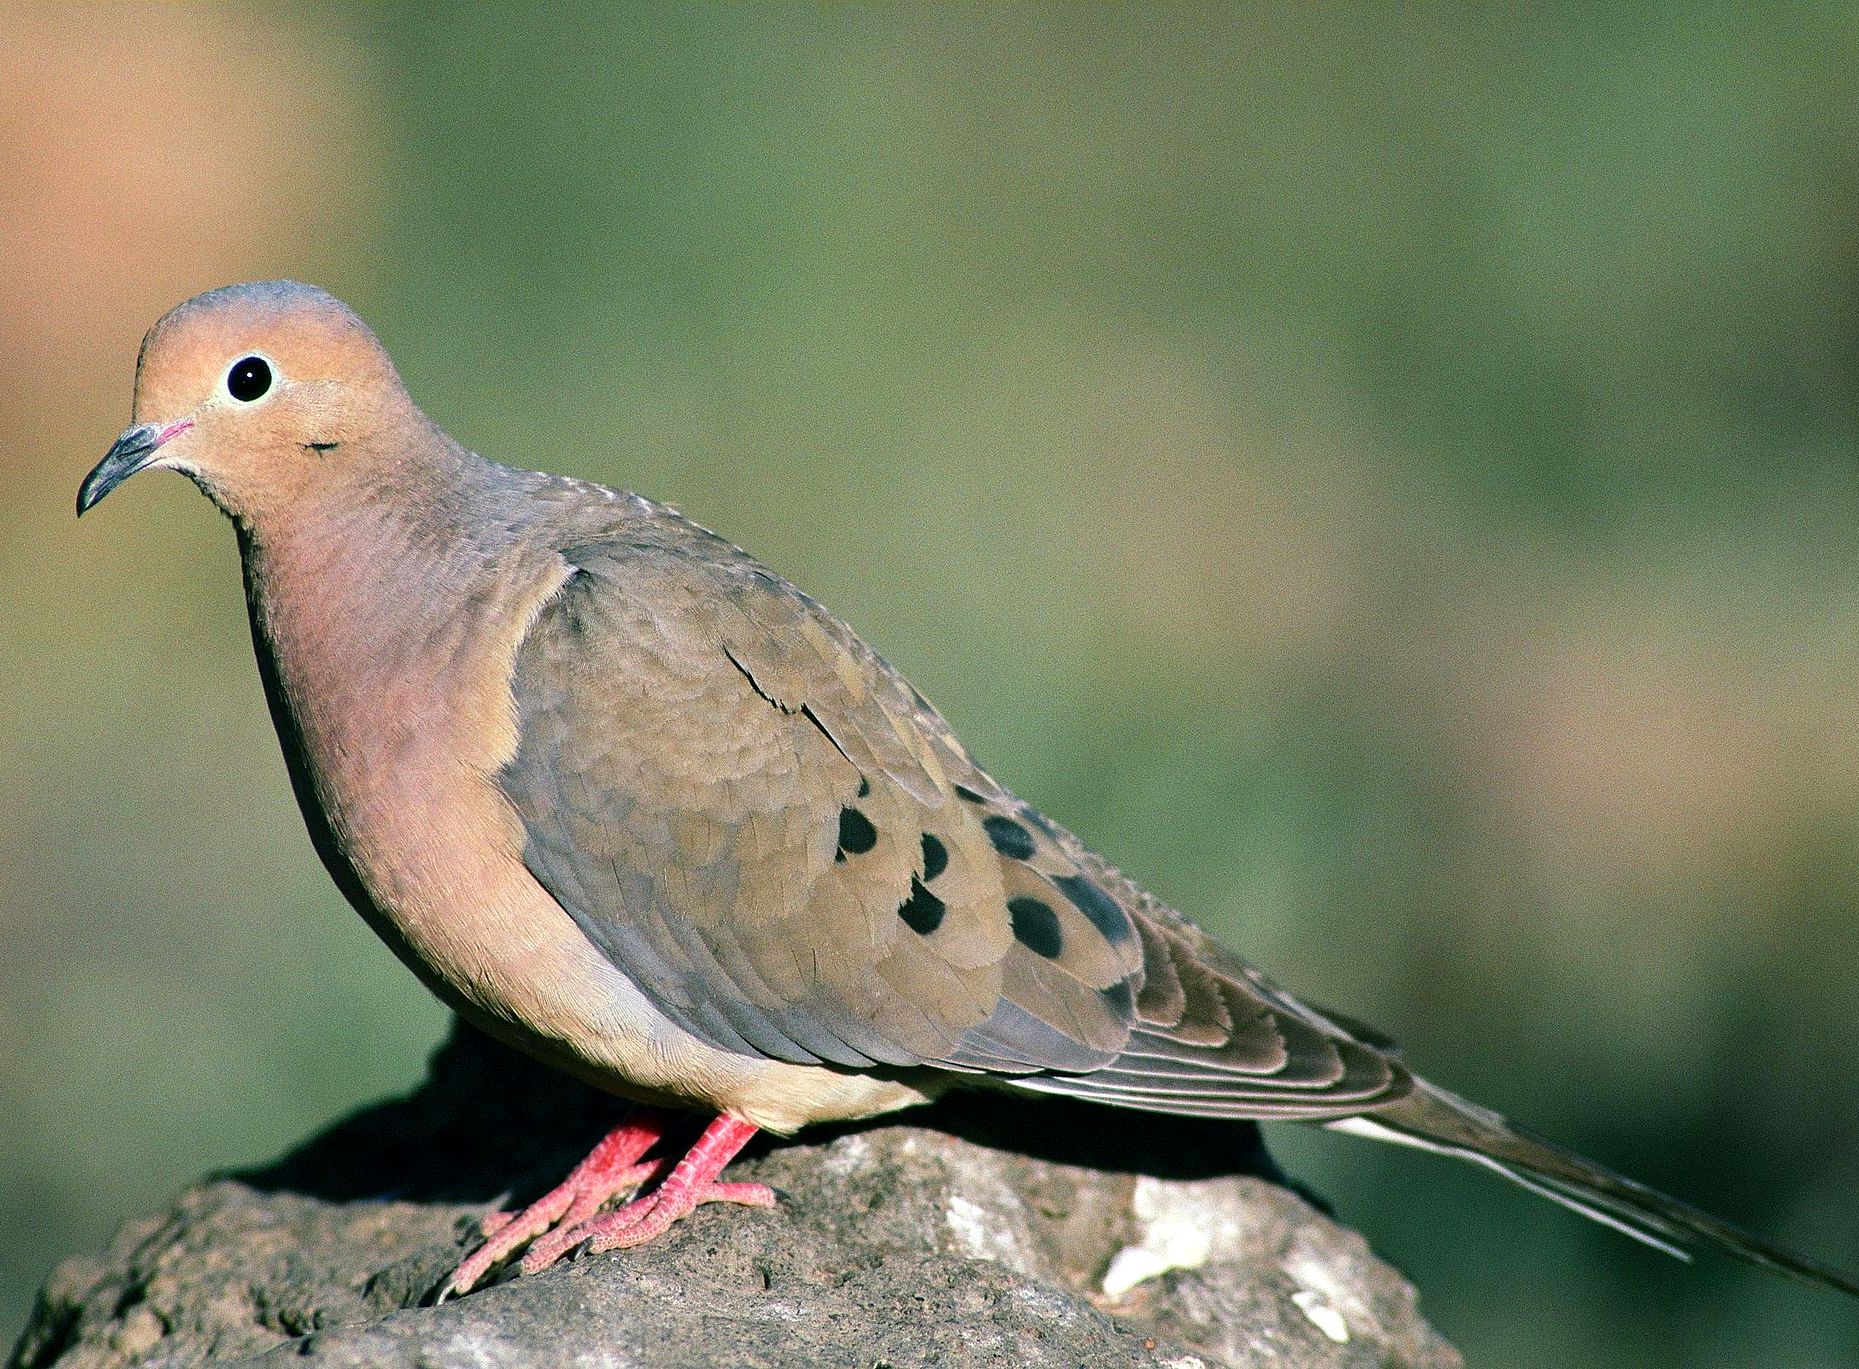 Bird Sounds and Songs of the Mourning Dove | The Old Farmer's Almanac